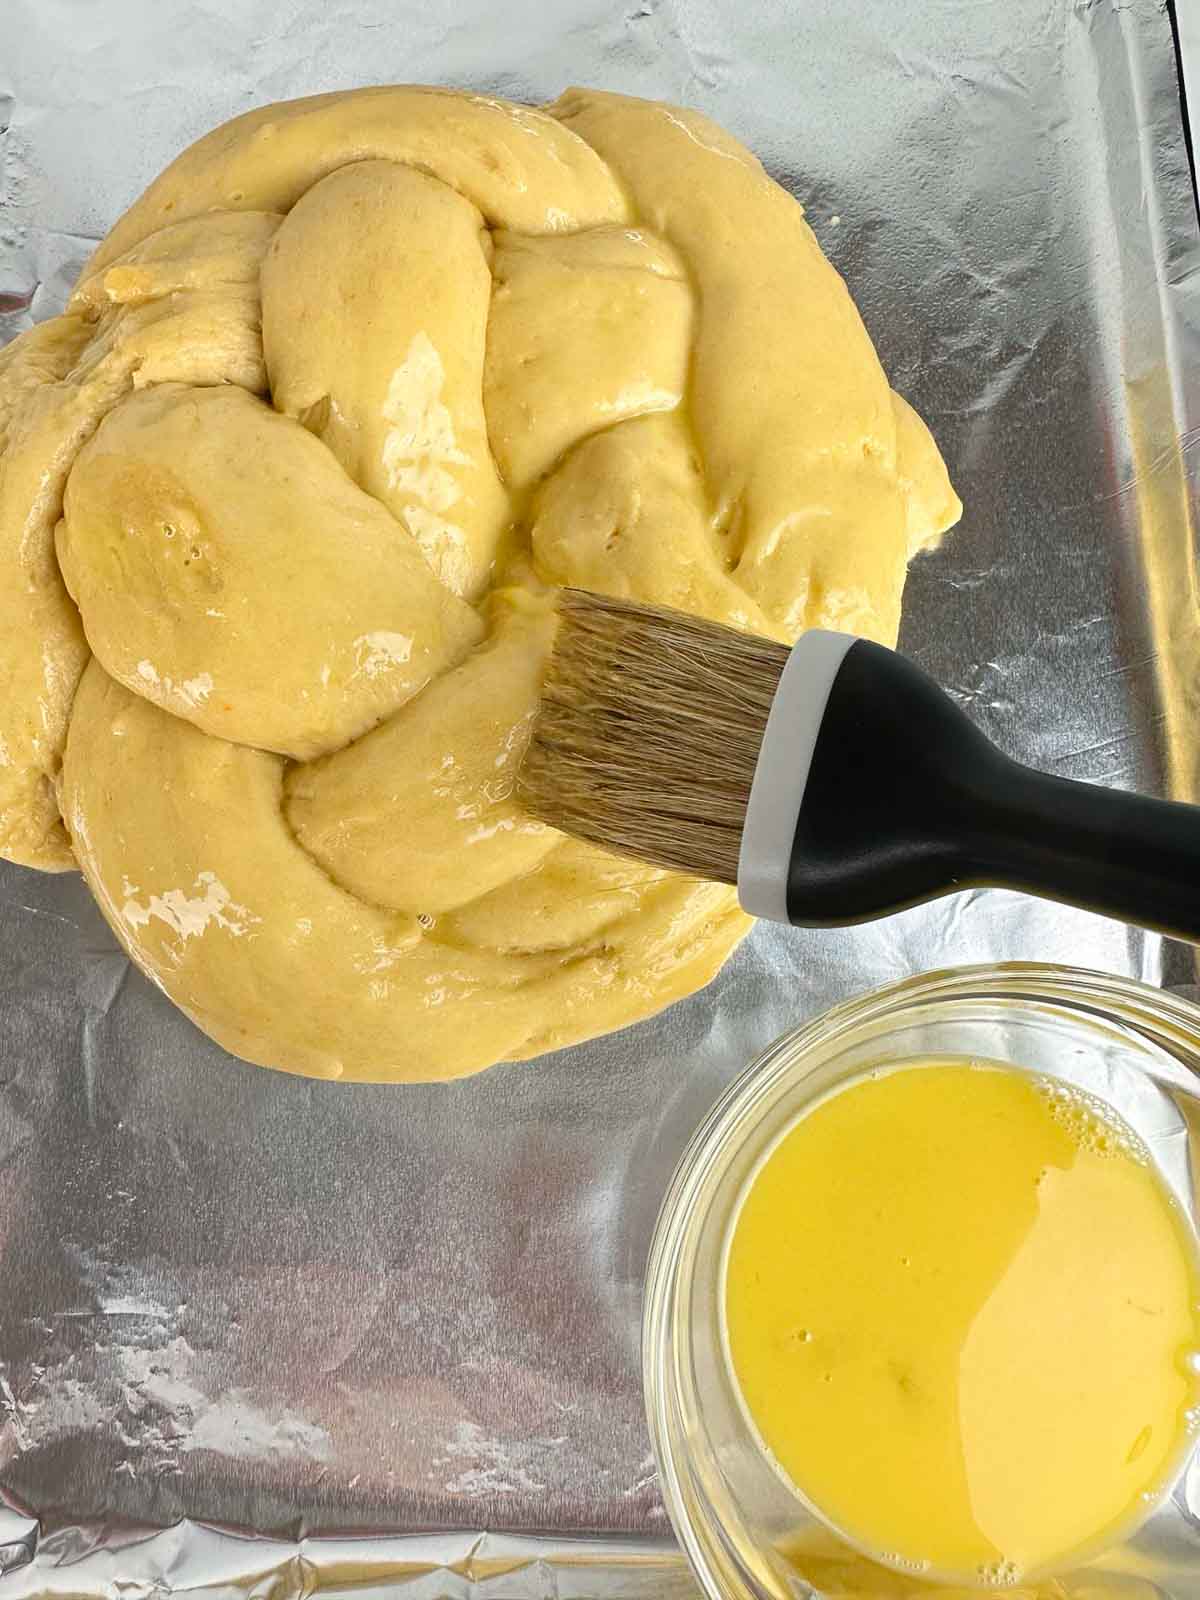 Brush the Easter bread with egg wash.